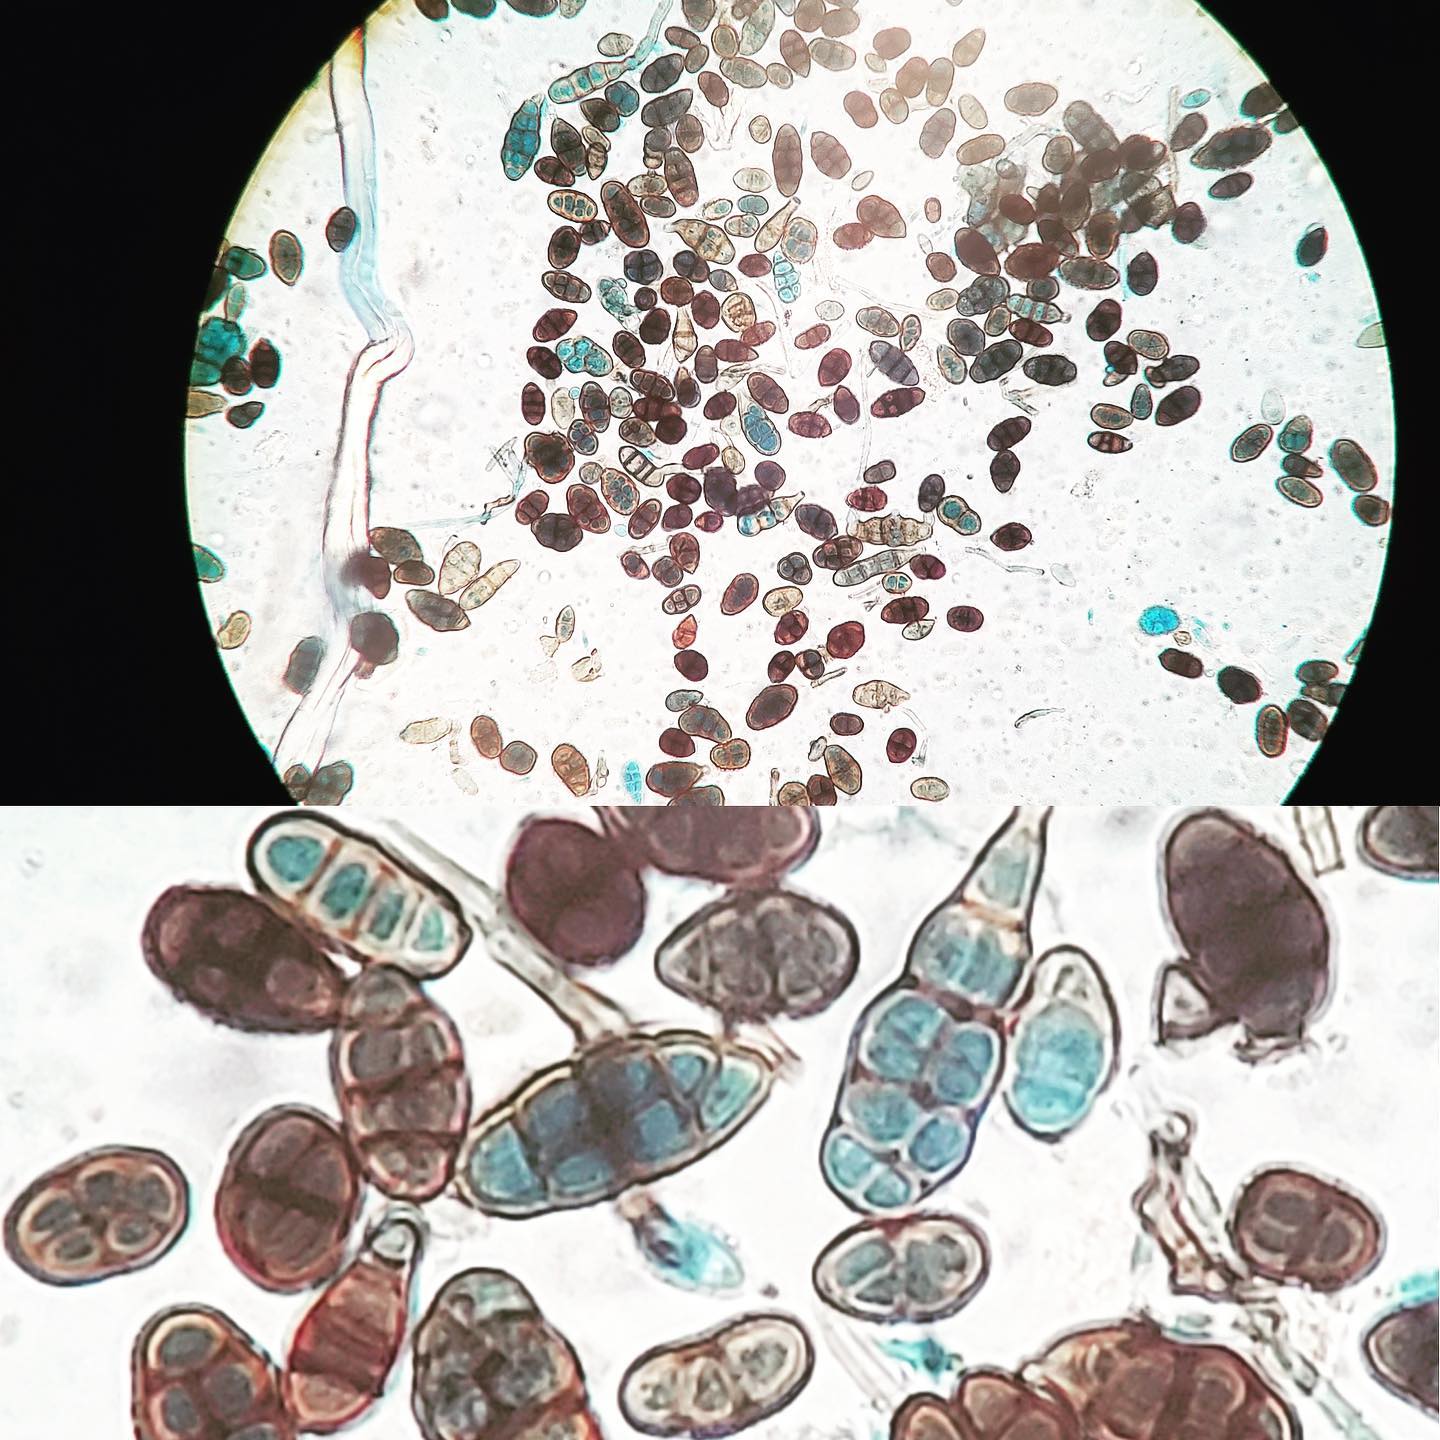 Found these little suckers eating away at drywall behind a leaky bathroom sink. Alternaria thrives on cellulose and moist conditions. #fungifriday #fungi #mold #ecologicslab #microbiology #alternaria #environmentallaboratory